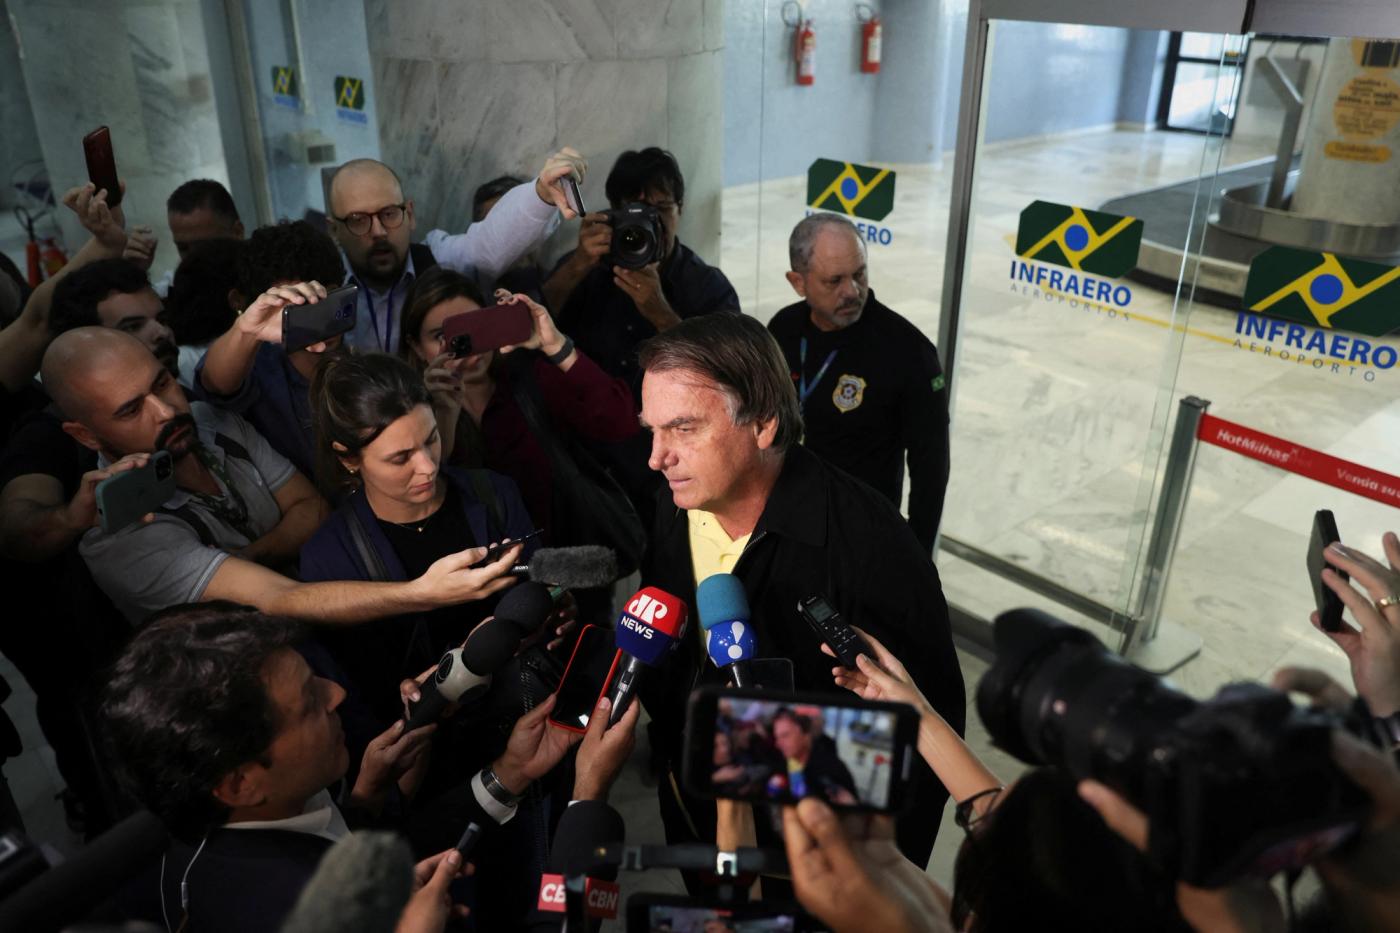 Brazil's former President Jair Bolsonaro speaks with media as he arrives at the airport in Rio de Janeiro, on the day the Electoral Justice continues the trial to determine his political rights, Brazil June 29, 2023. REUTERS/Pilar Olivares